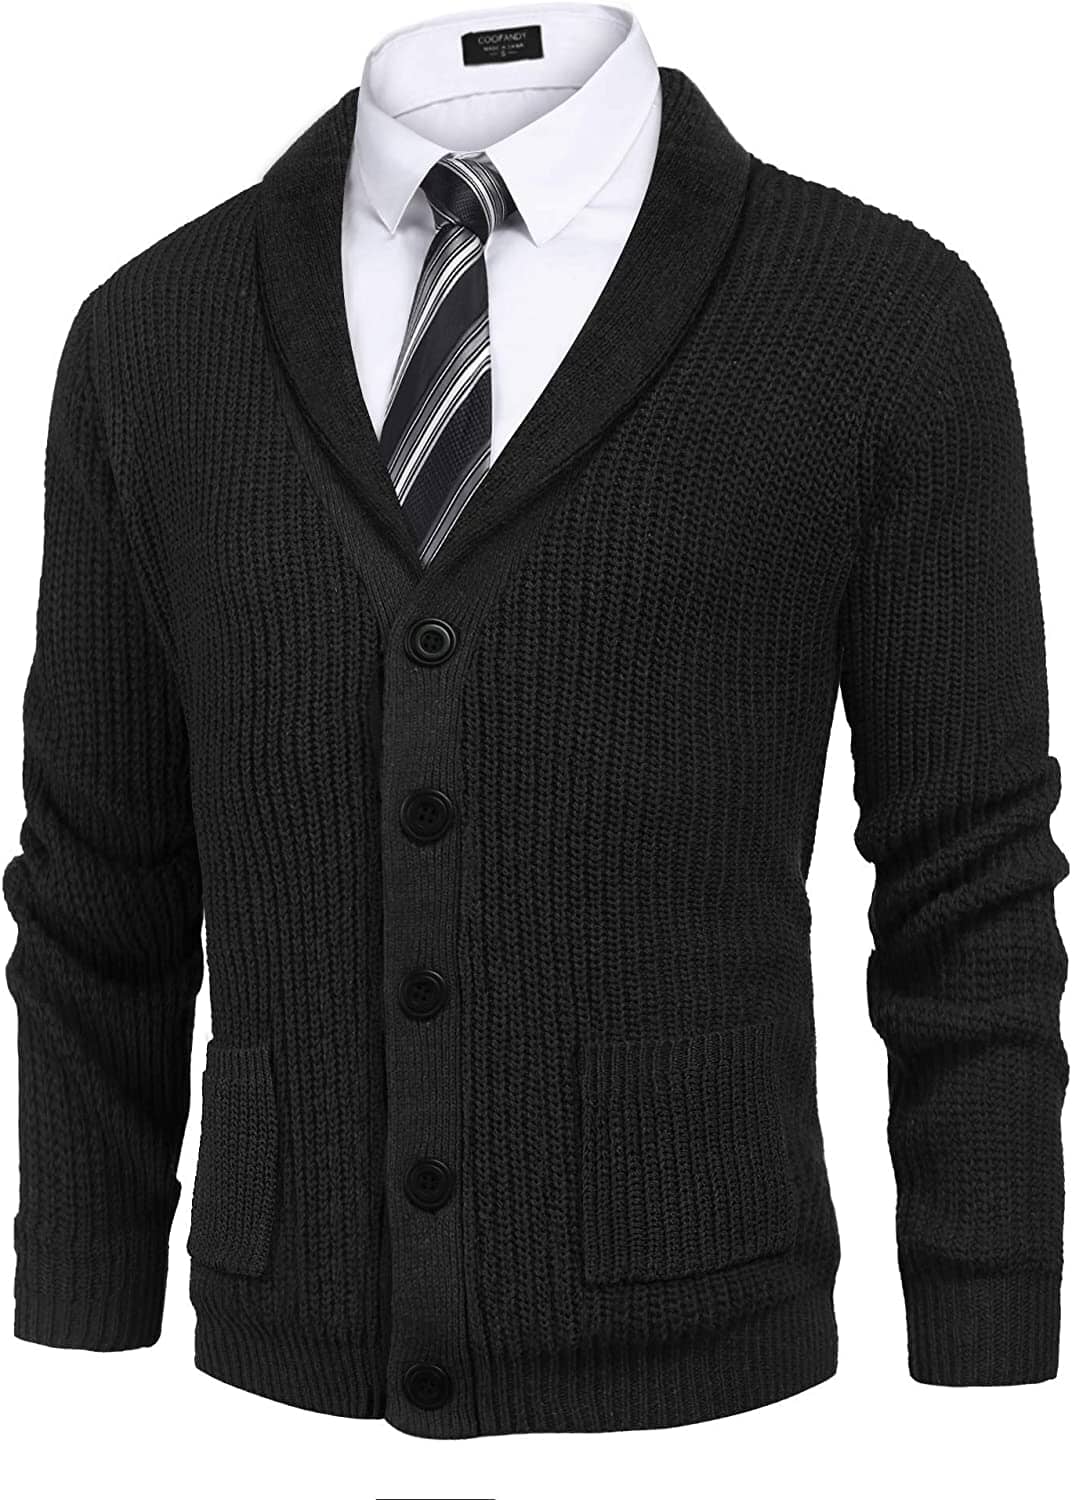 Lapel Button Up Cable Knit Cardigan with Pockets (US Only) Cardigans COOFANDY Store Black S 